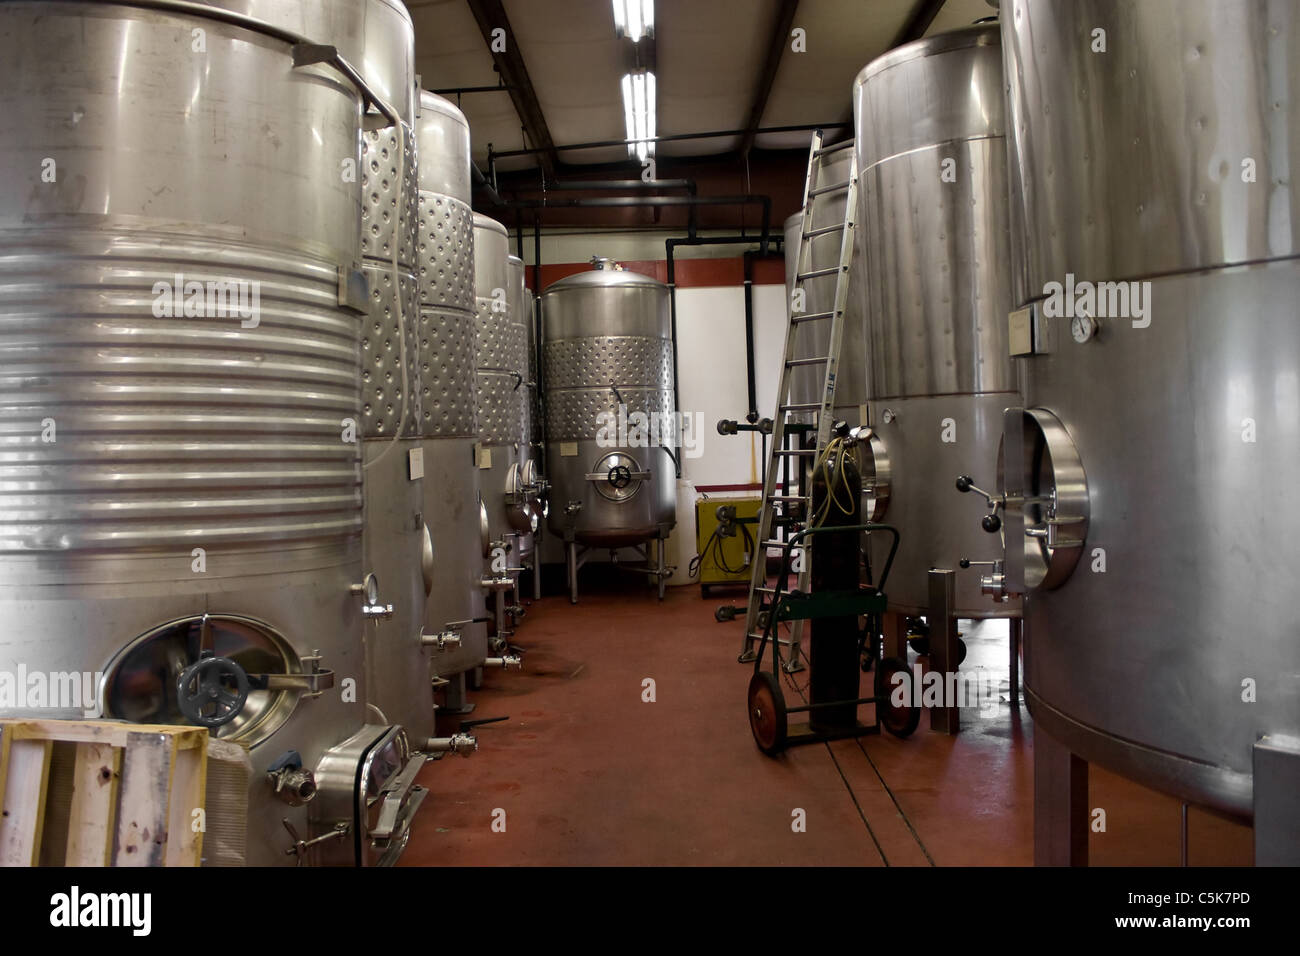 Modern aluminum barrels where grape juice is aged into wine located in a vineyard cellar. Stock Photo